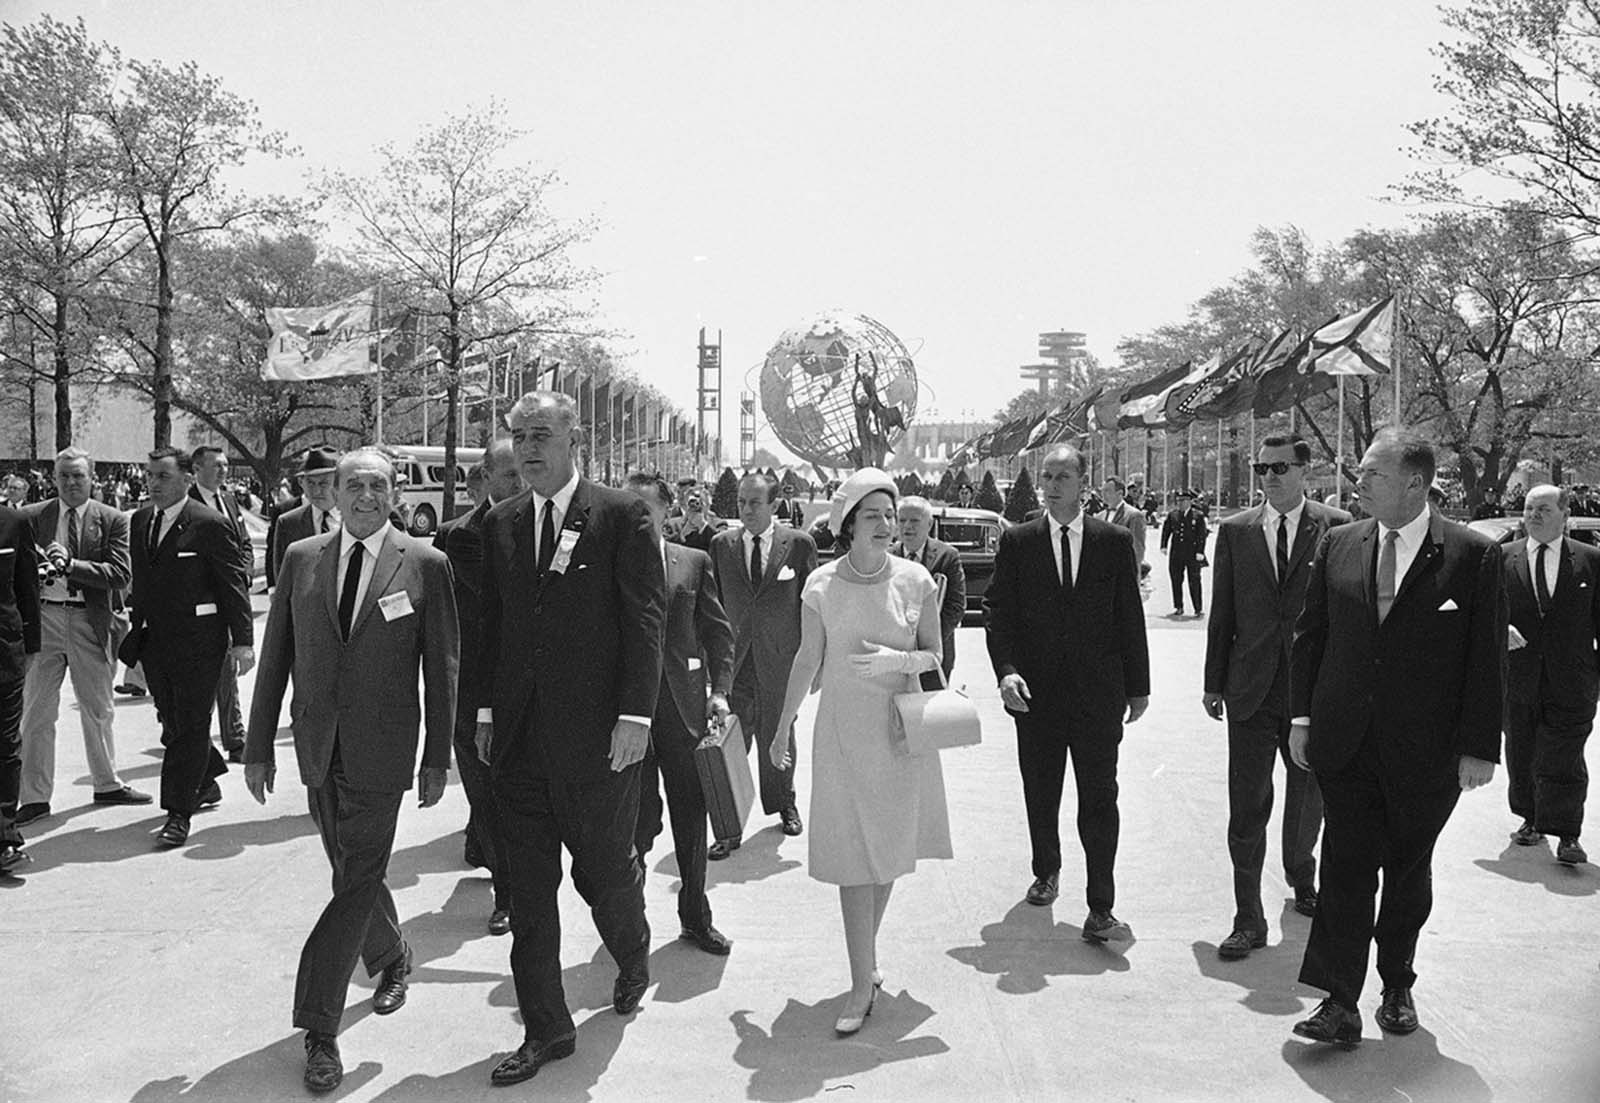 President Lyndon B. Johnson is flanked by Lady Bird Johnson and Norman K. Winston, head of the U.S. Pavilion as he walks through the New York World's Fair grounds on his way to the U.S. Pavilion on May 9, 1964.